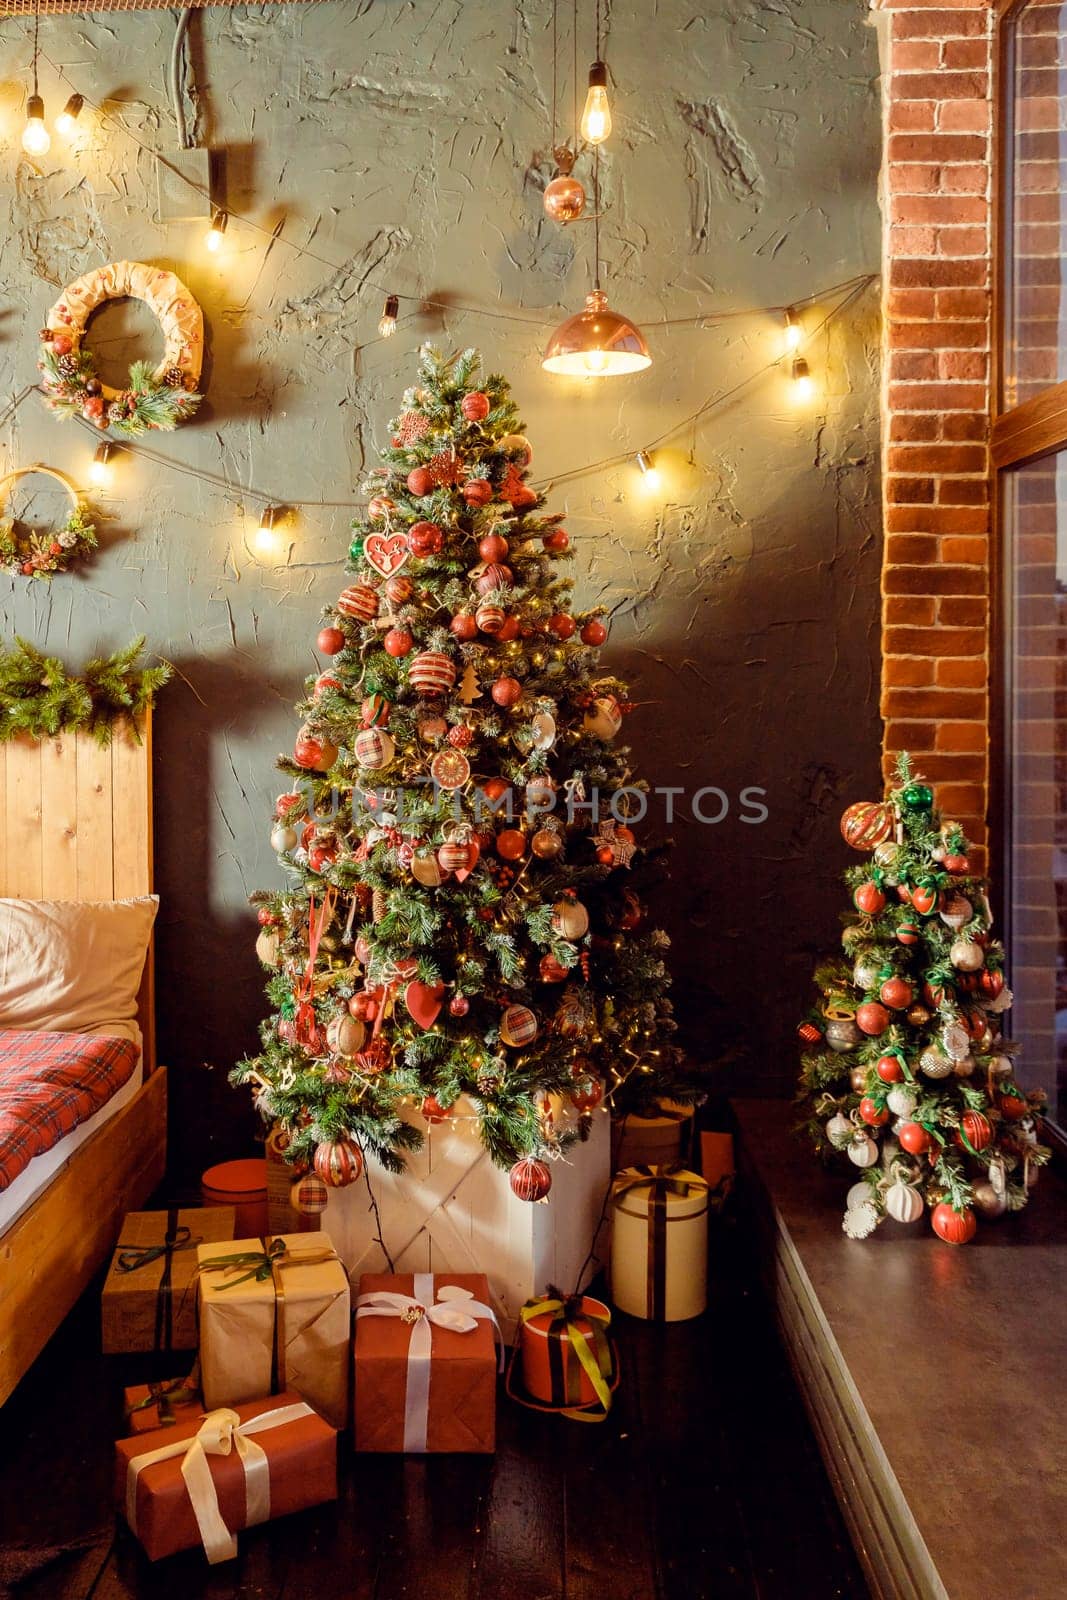 Classical Christmas decorated interior living room. Christmas tree with red golden ornament decorations. Modern classic style interior design apartment. Christmas eve at home.Cozy winter scene by YuliaYaspe1979